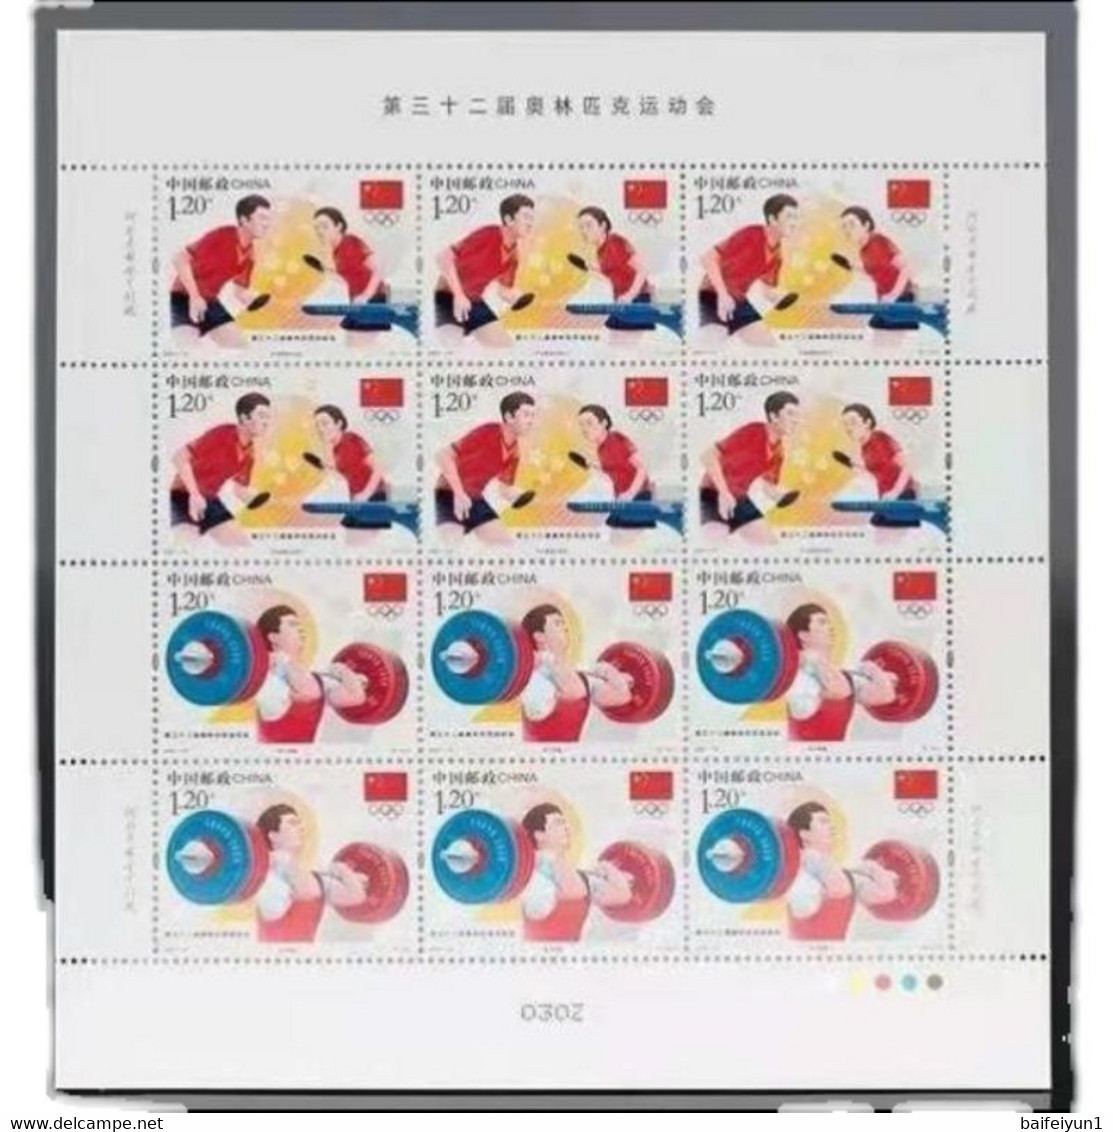 China 2021-14 The 2020 Tokyo Olympic Games Stamps 2v Table Tennis Full Sheet - Zomer 2020: Tokio